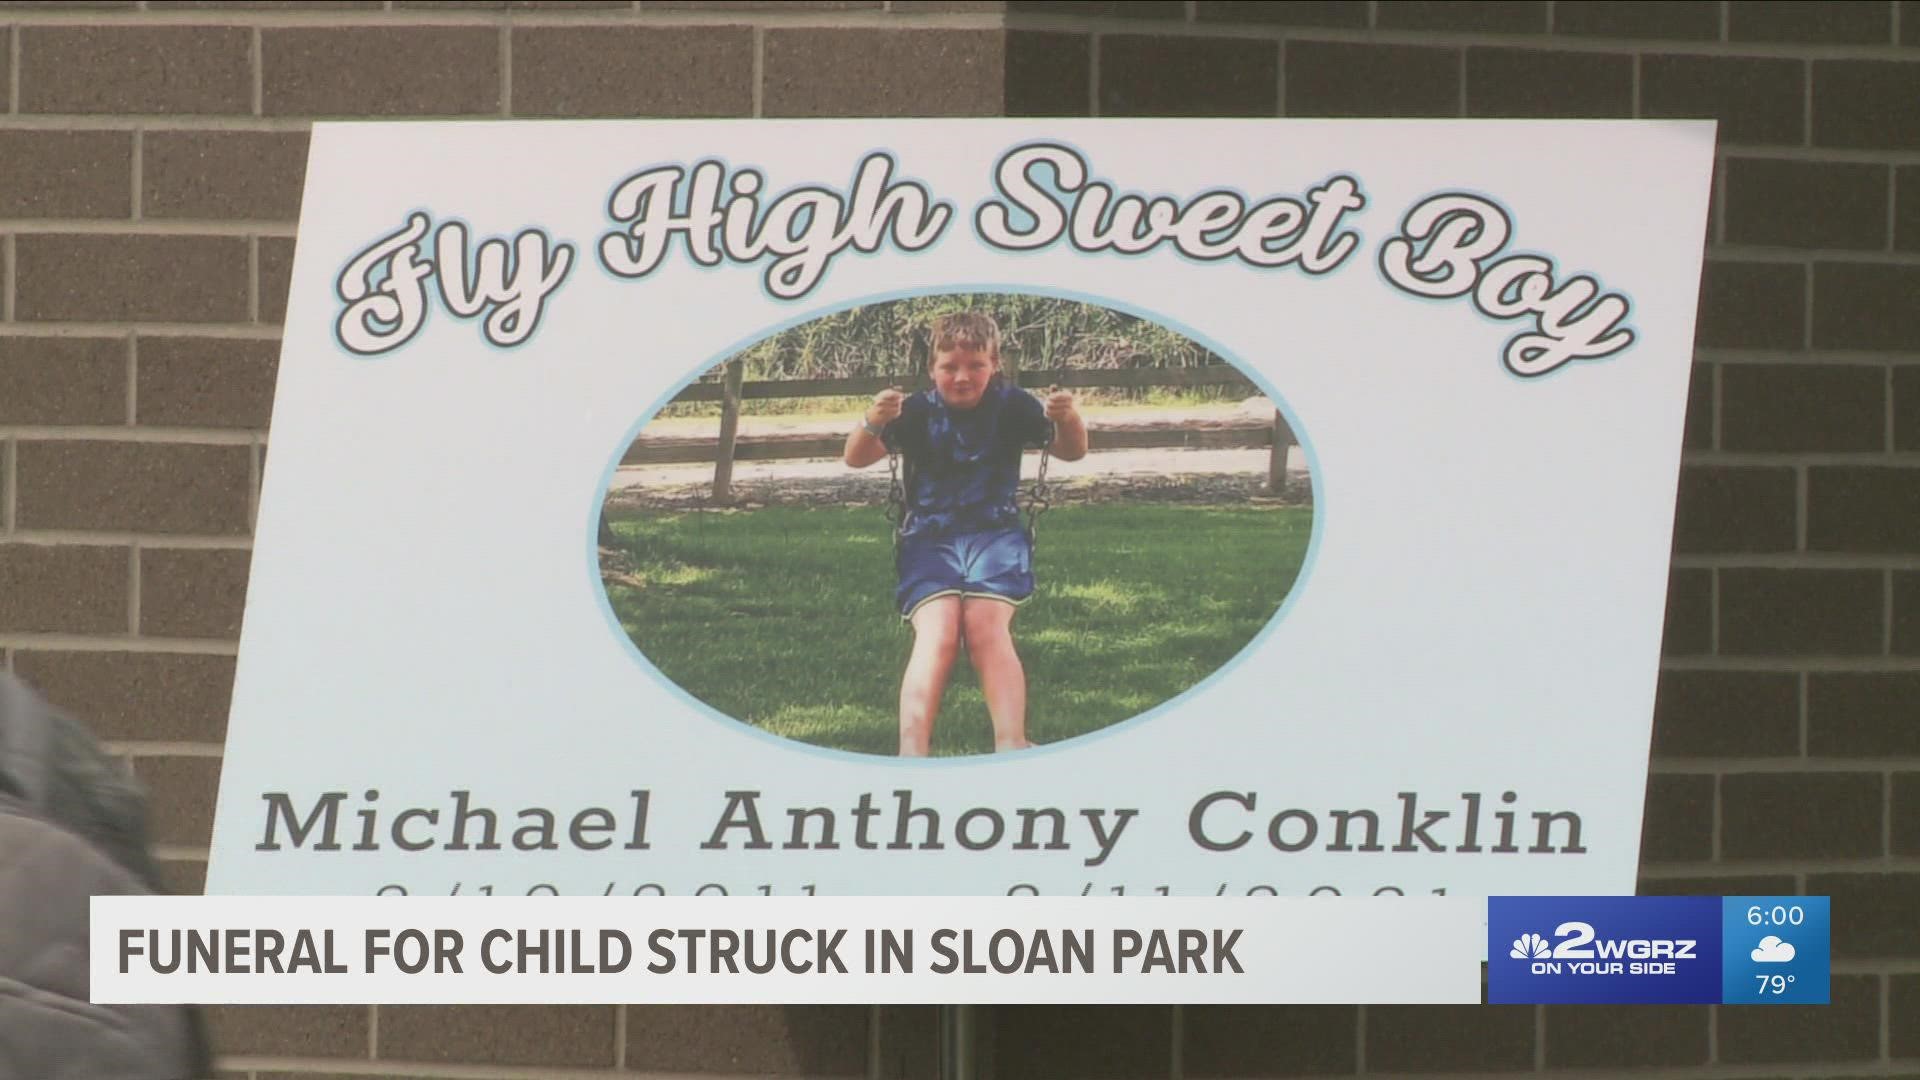 Ten year old Michael Conklin was laid to rest this morning. The funeral services began just as the man charged in connection with his death was in court.